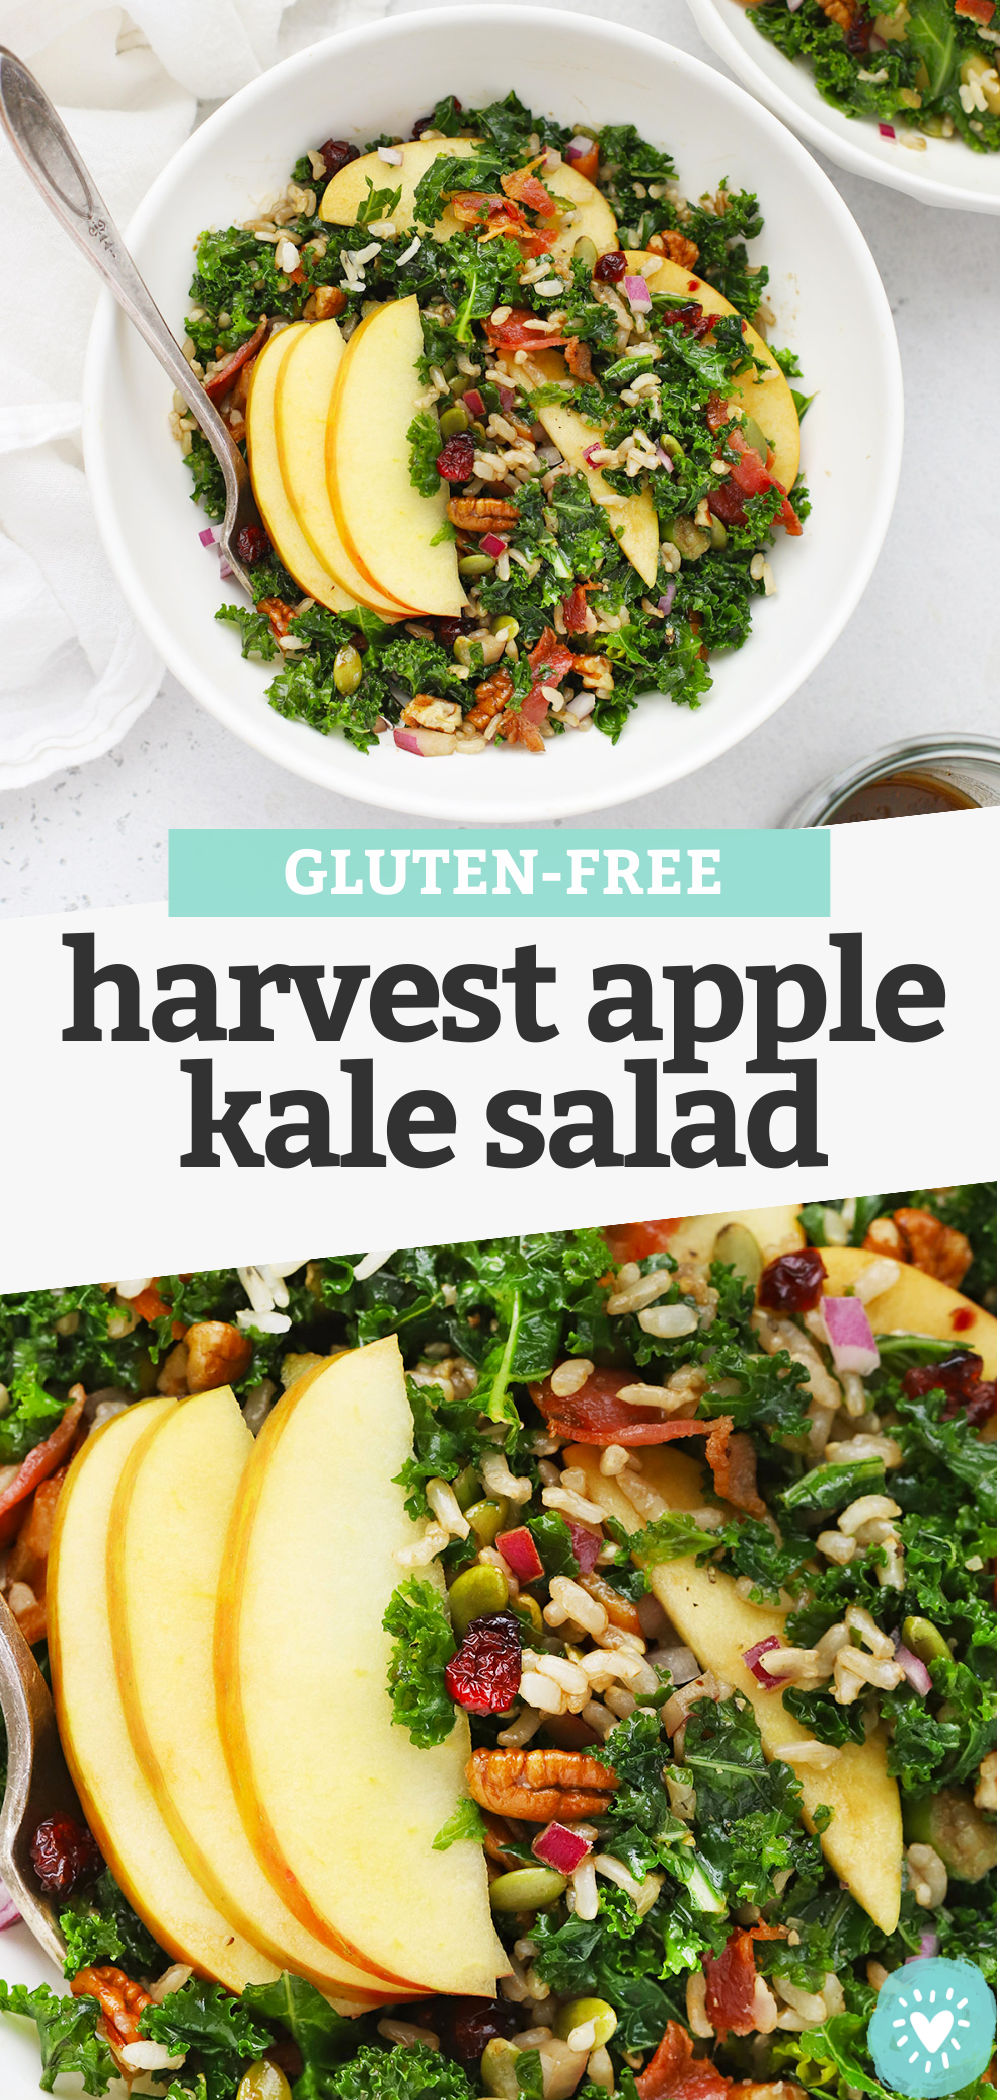 Collage of images of Harvest Apple Kale Salad with text overlay that reads "Gluten-Free Harvest Apple Kale Salad"